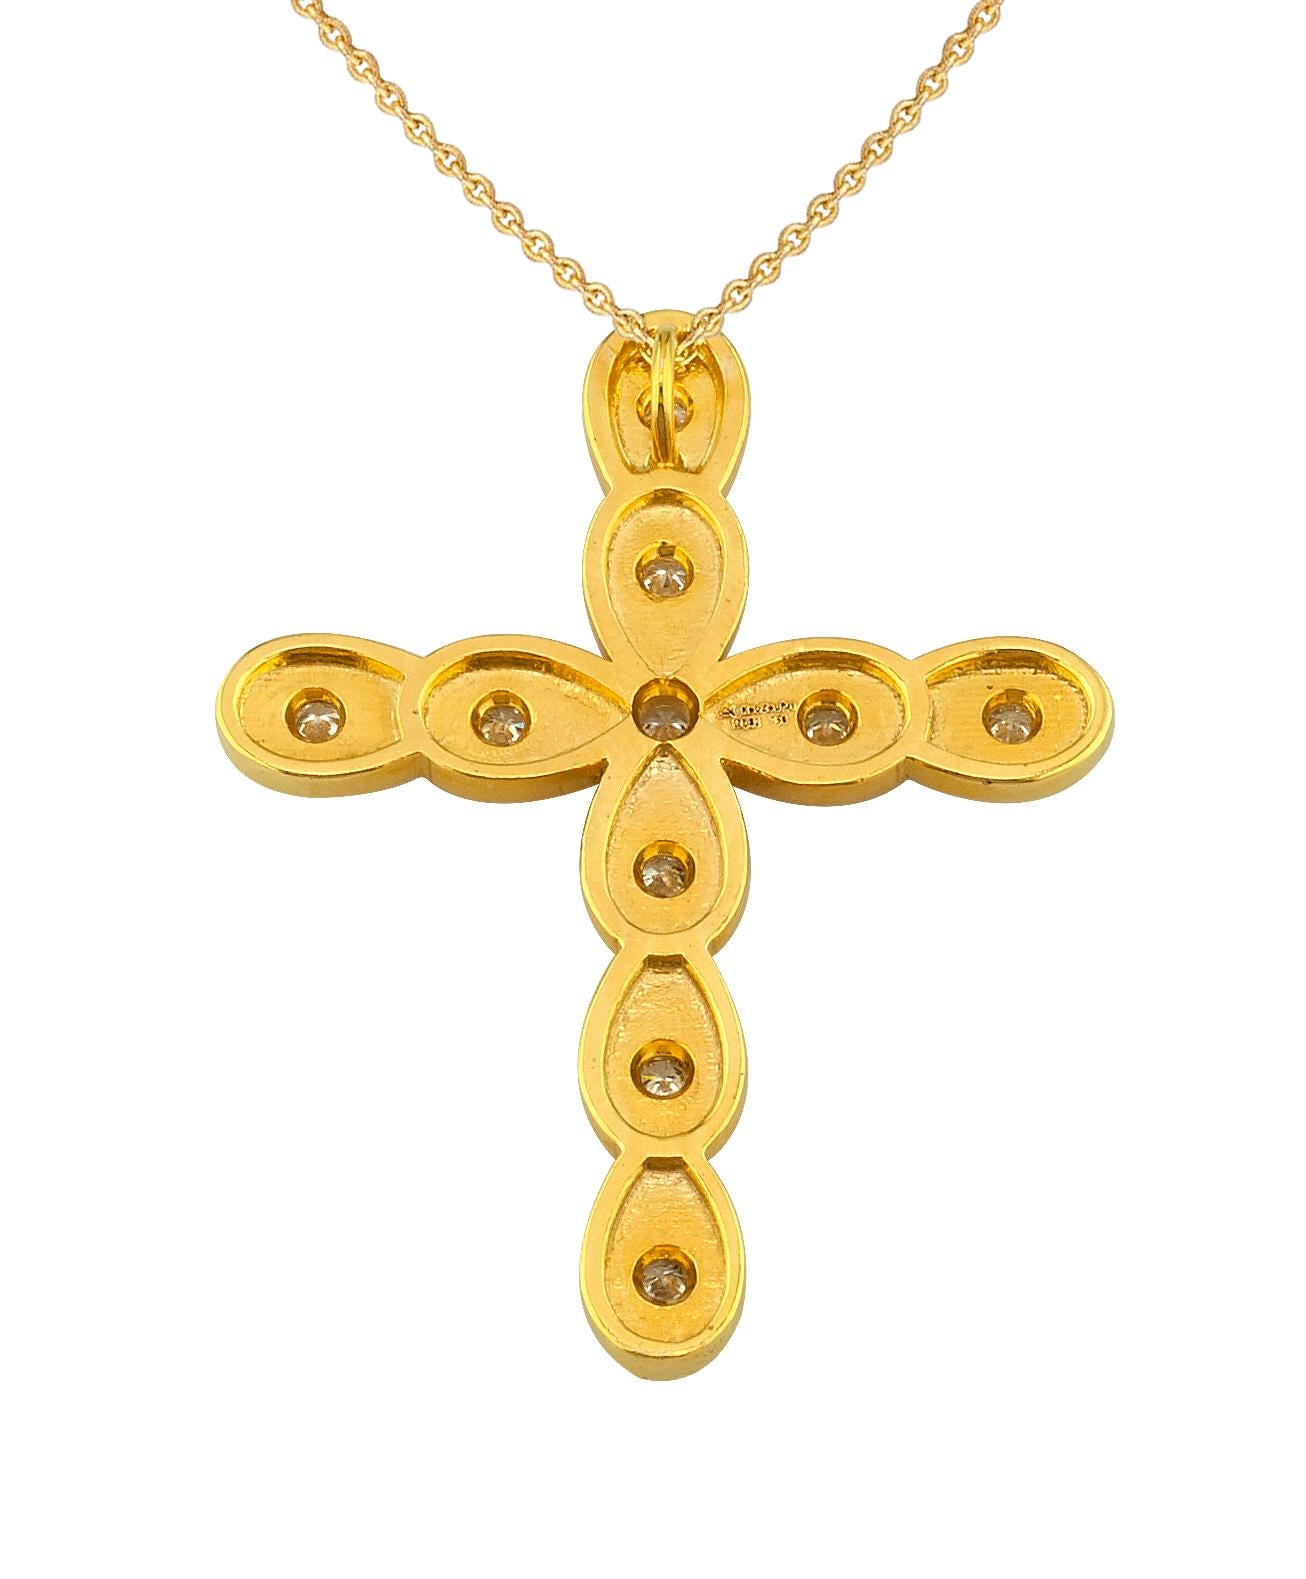 Georgios Collections 18 Karat Yellow Gold Diamond Cross Necklace with Chain For Sale 4